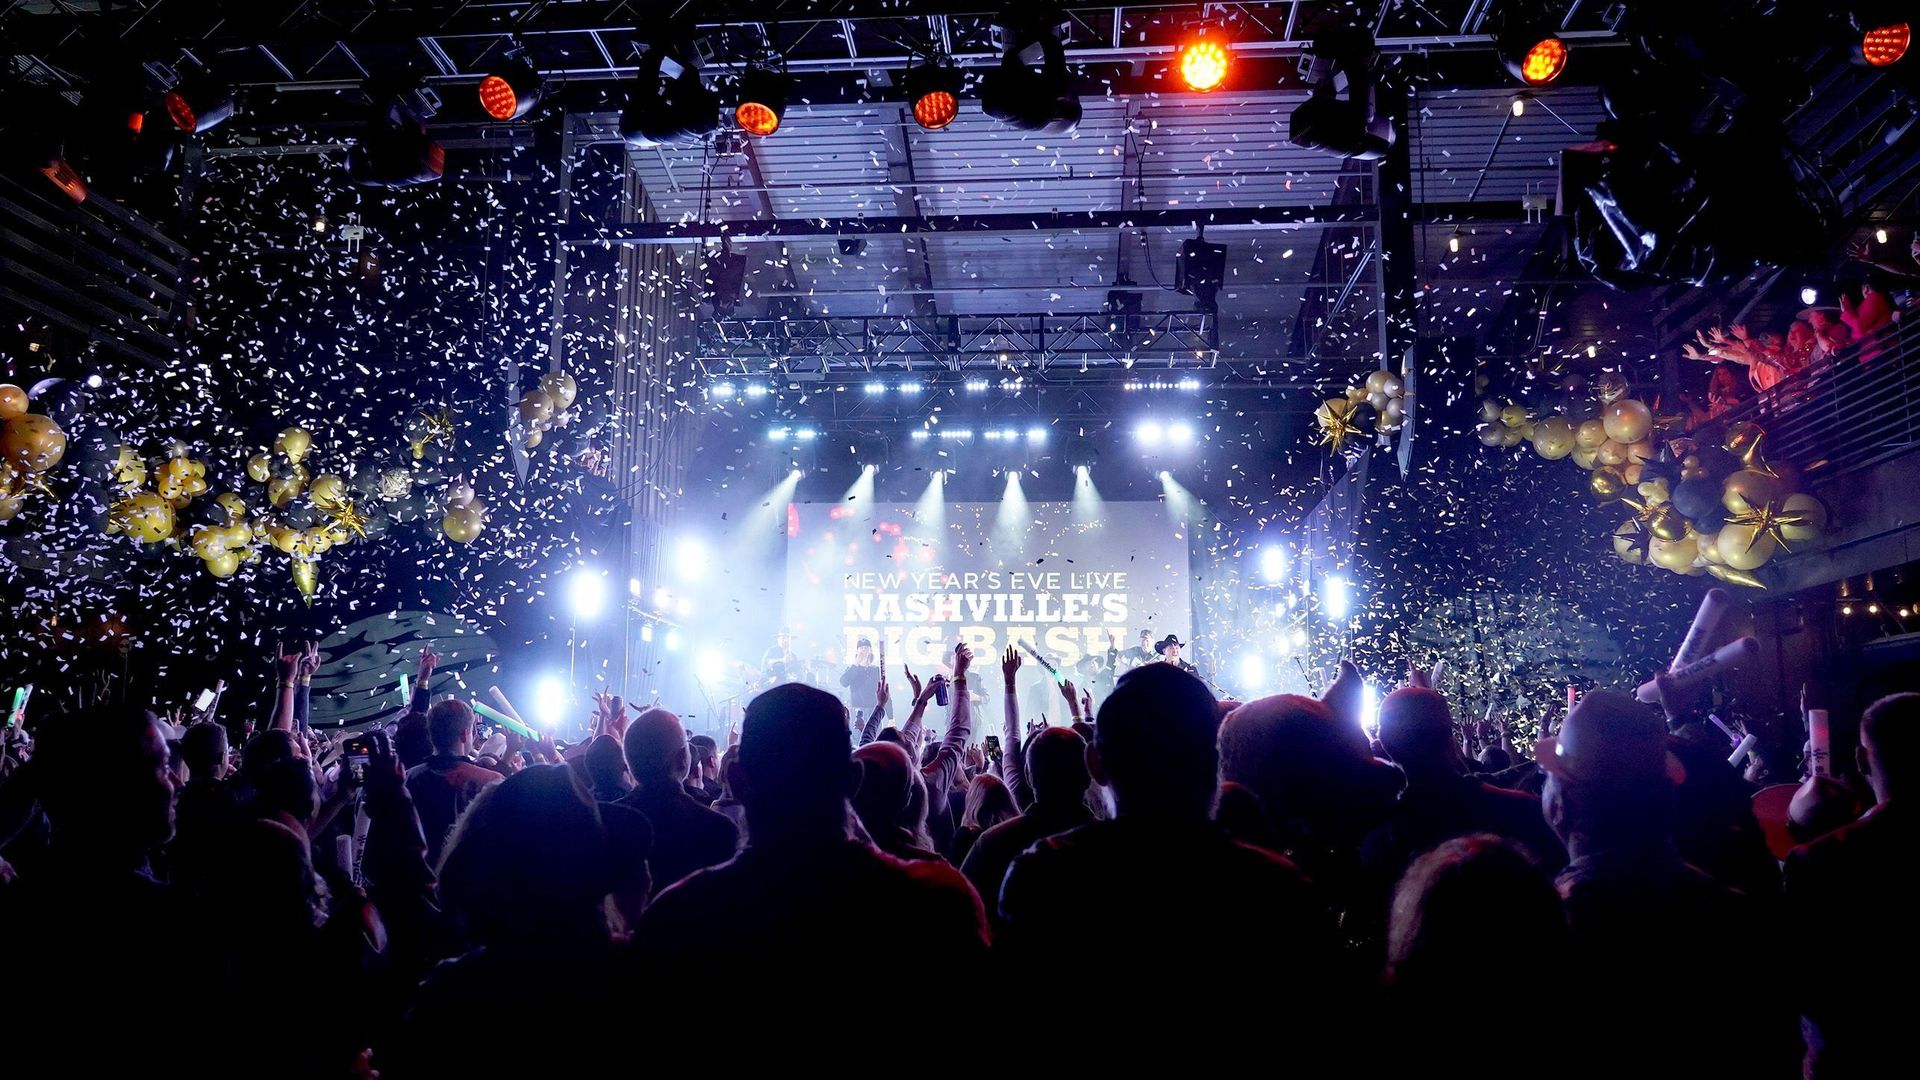 A crowd faces the stage at a music concert as confetti falls.